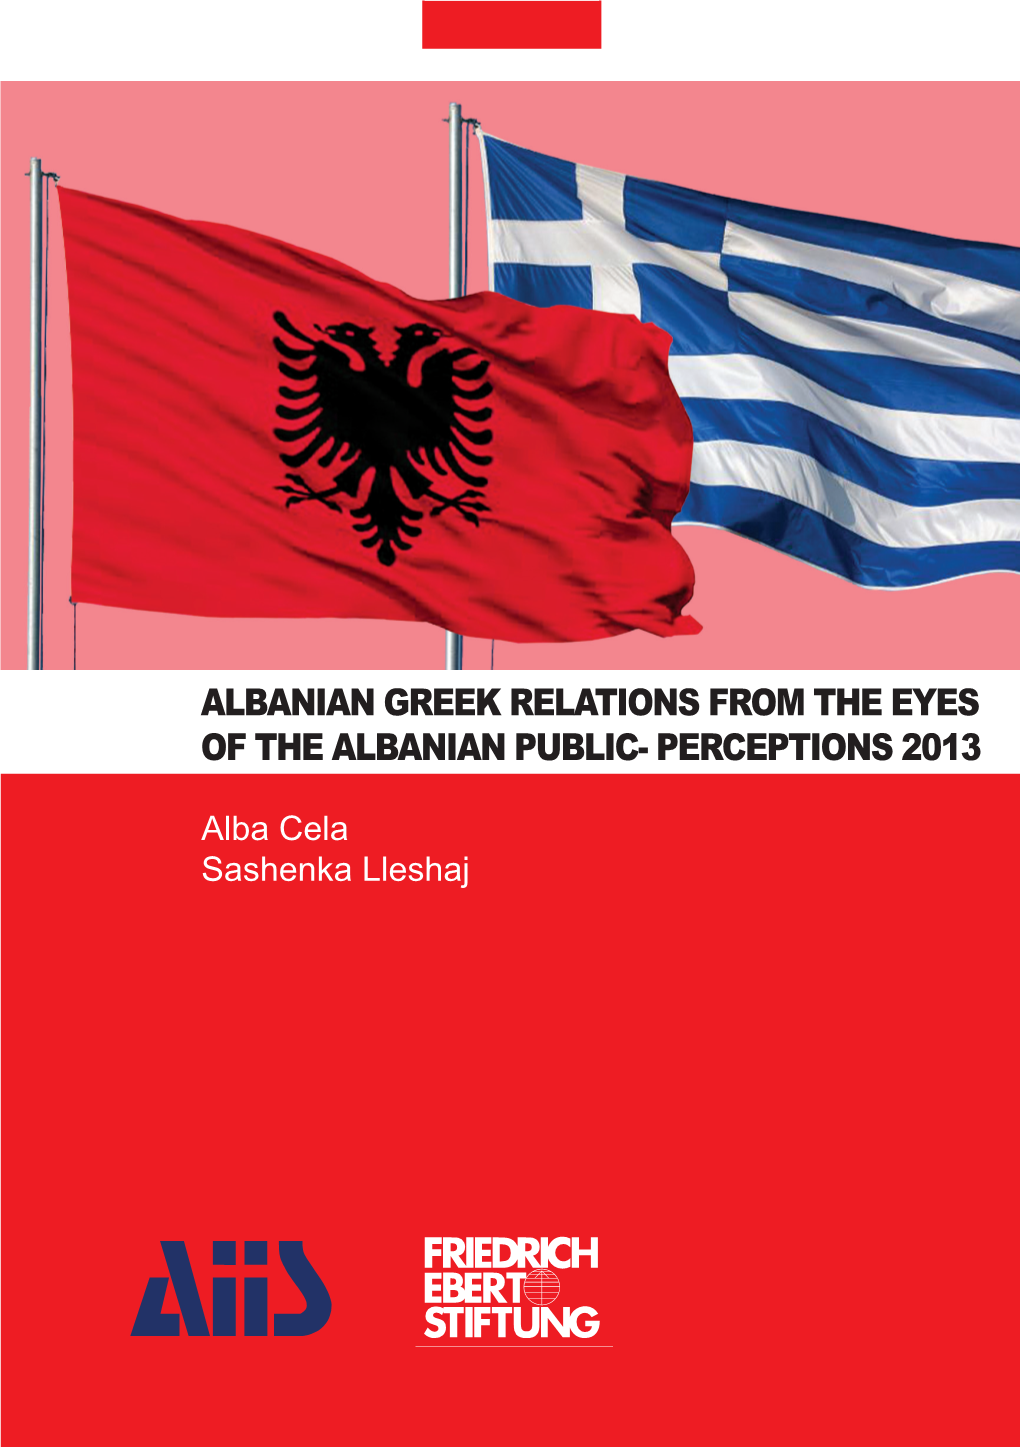 Albanian Greek Relations from the Eyes of the Albanian Public – Perceptions 2013”